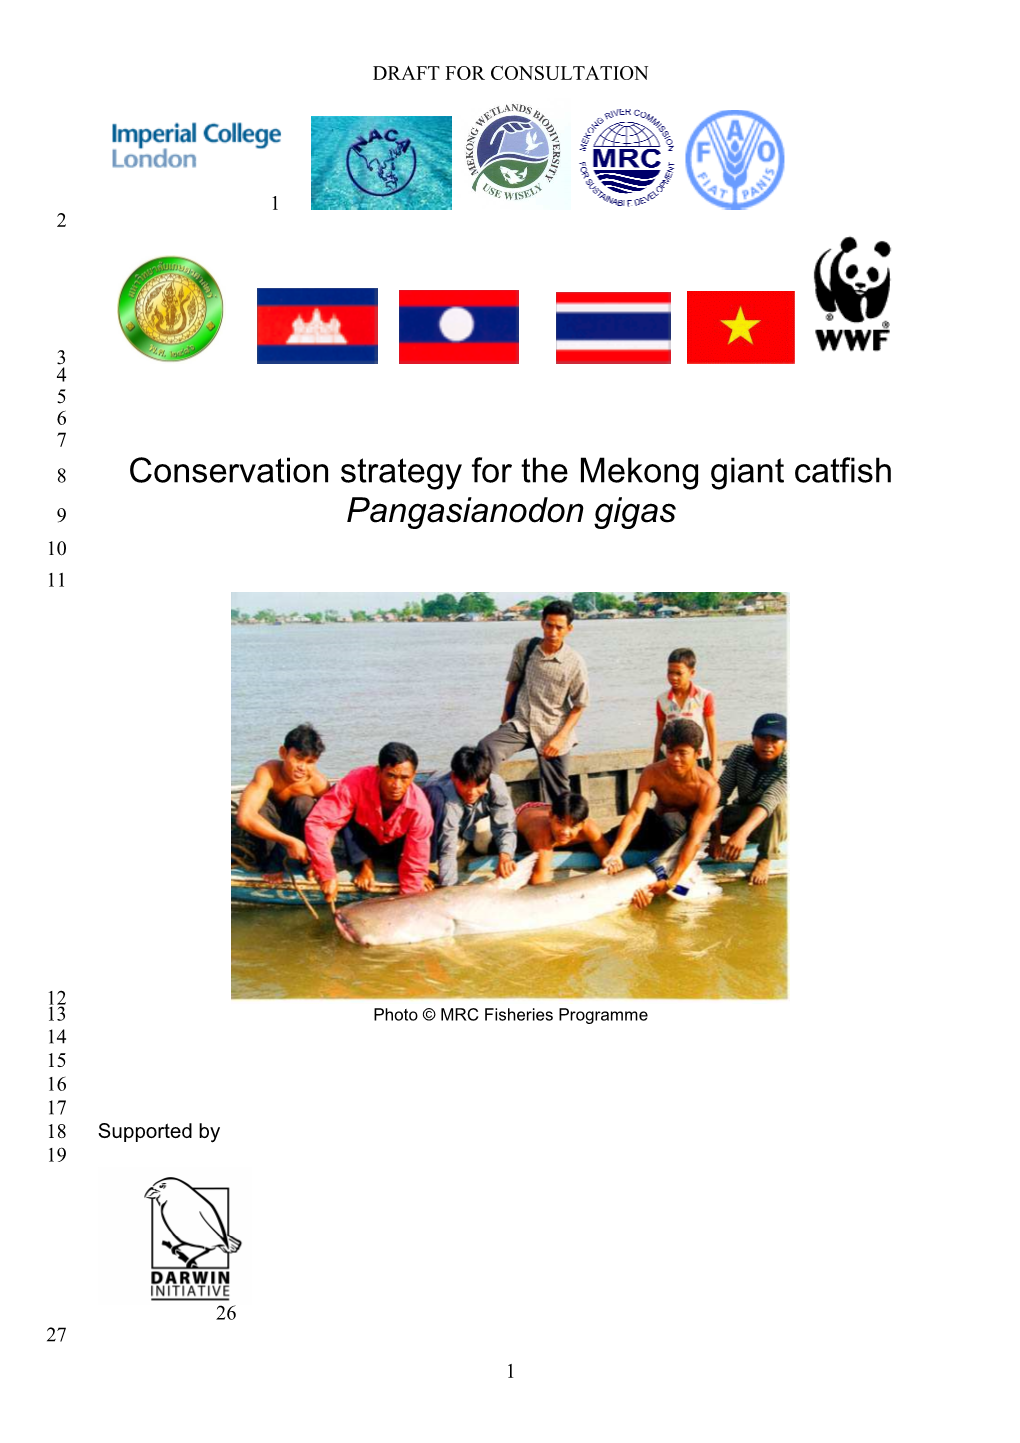 Conservation Strategy for the Mekong Giant Catfish Pangasianodon Gigas